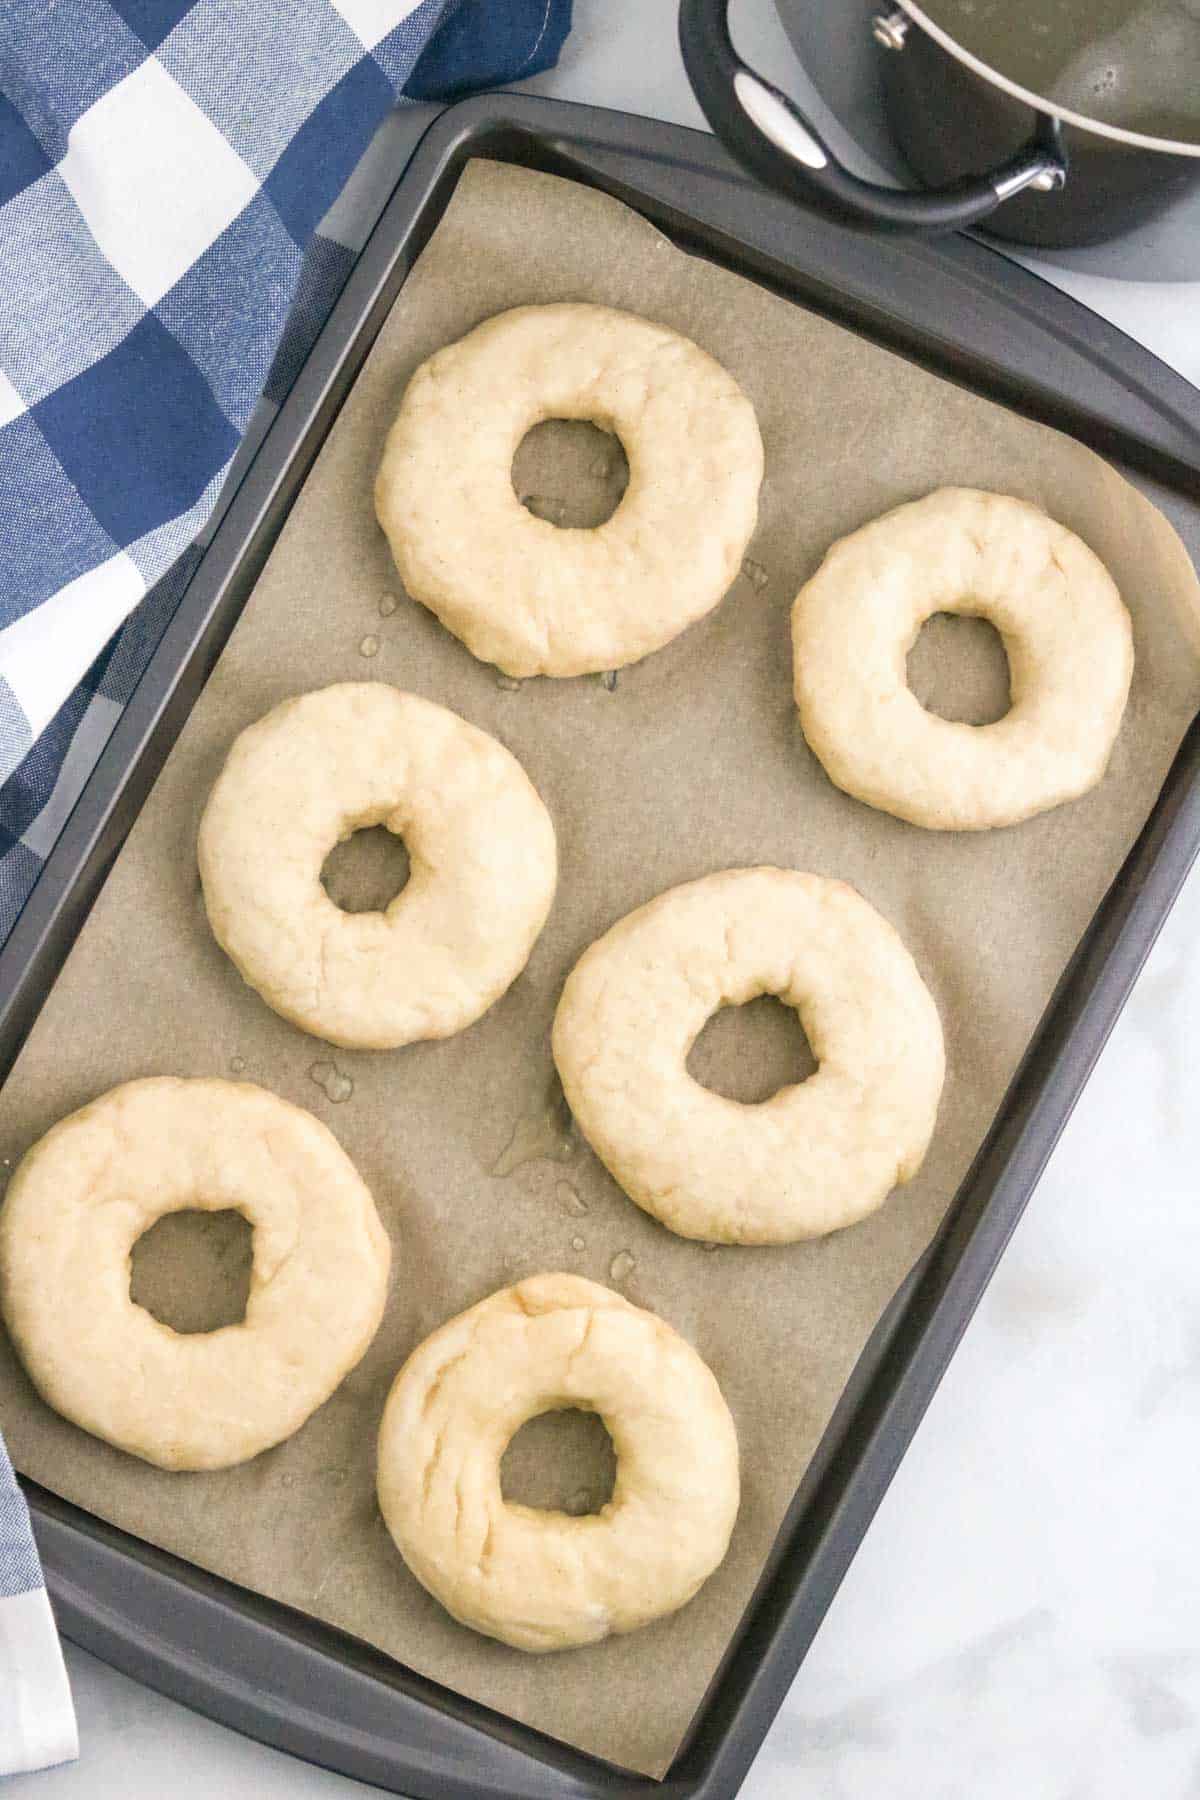 Boiled bagels on a lined baking sheet.